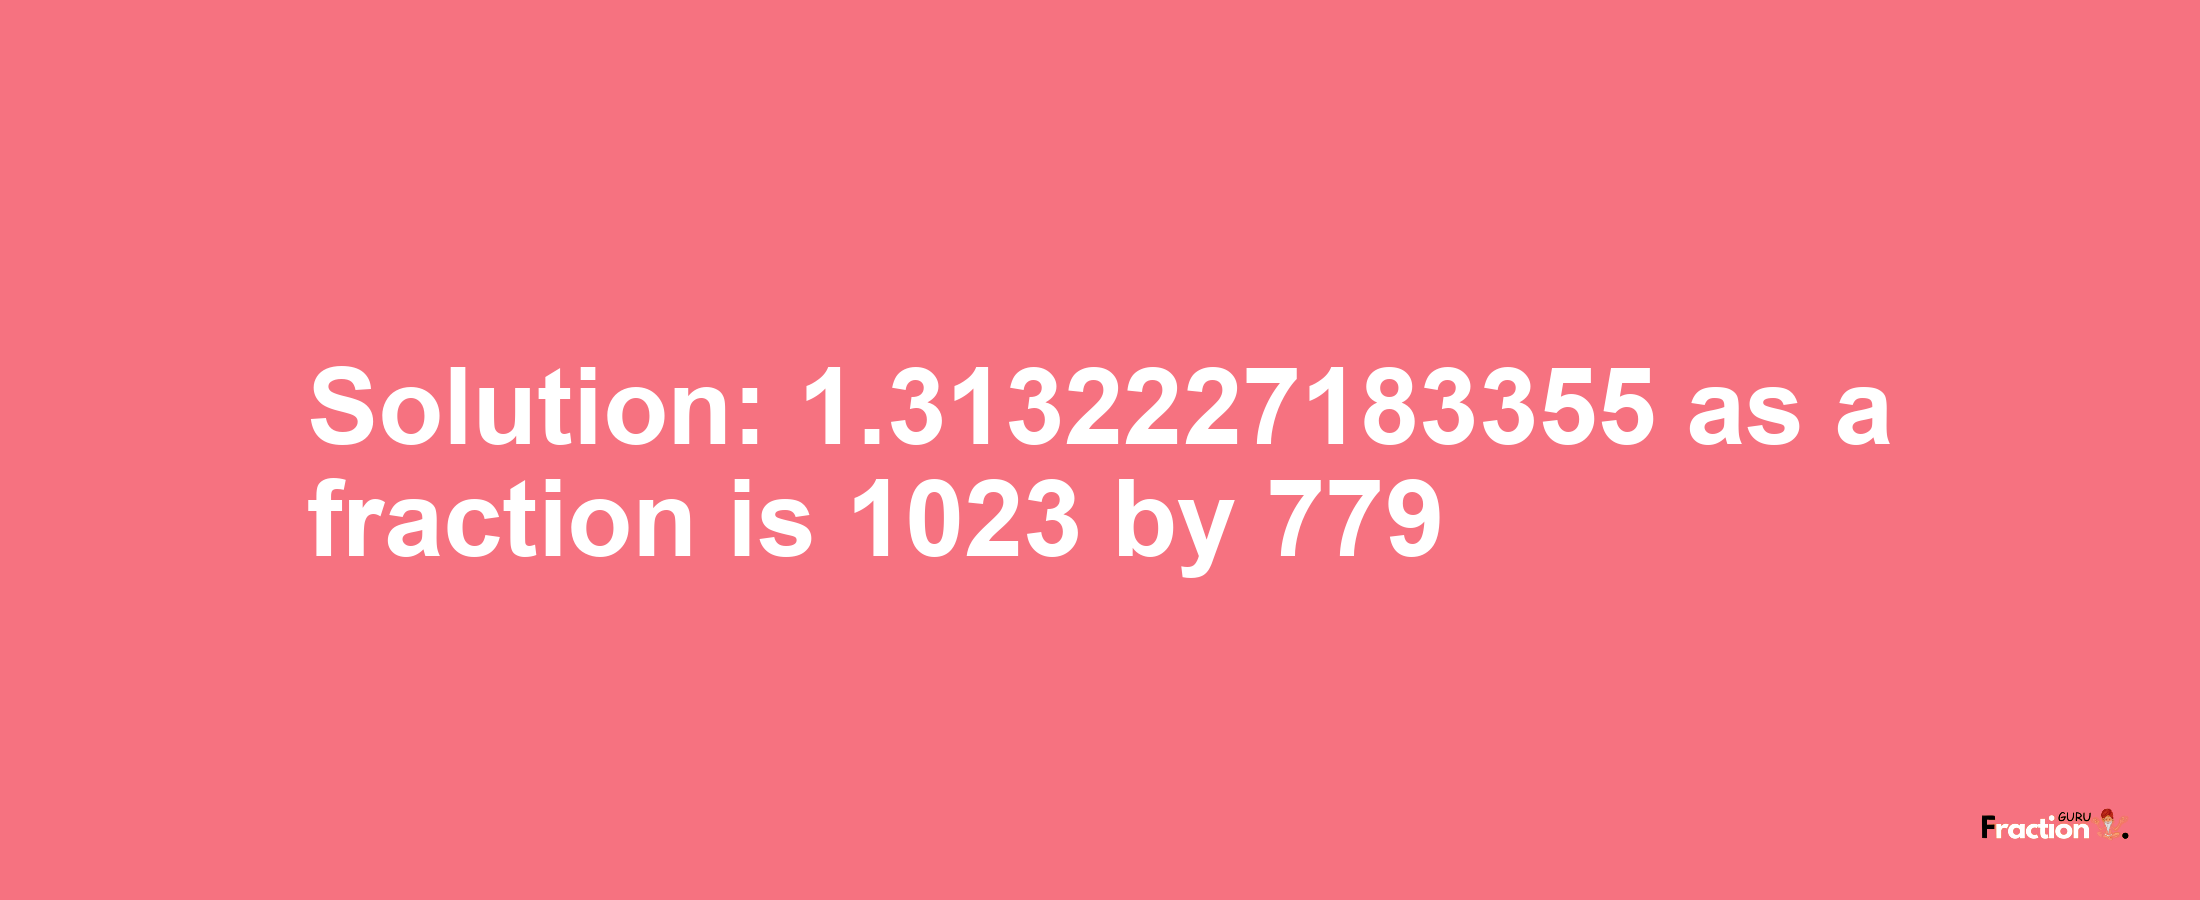 Solution:1.3132227183355 as a fraction is 1023/779